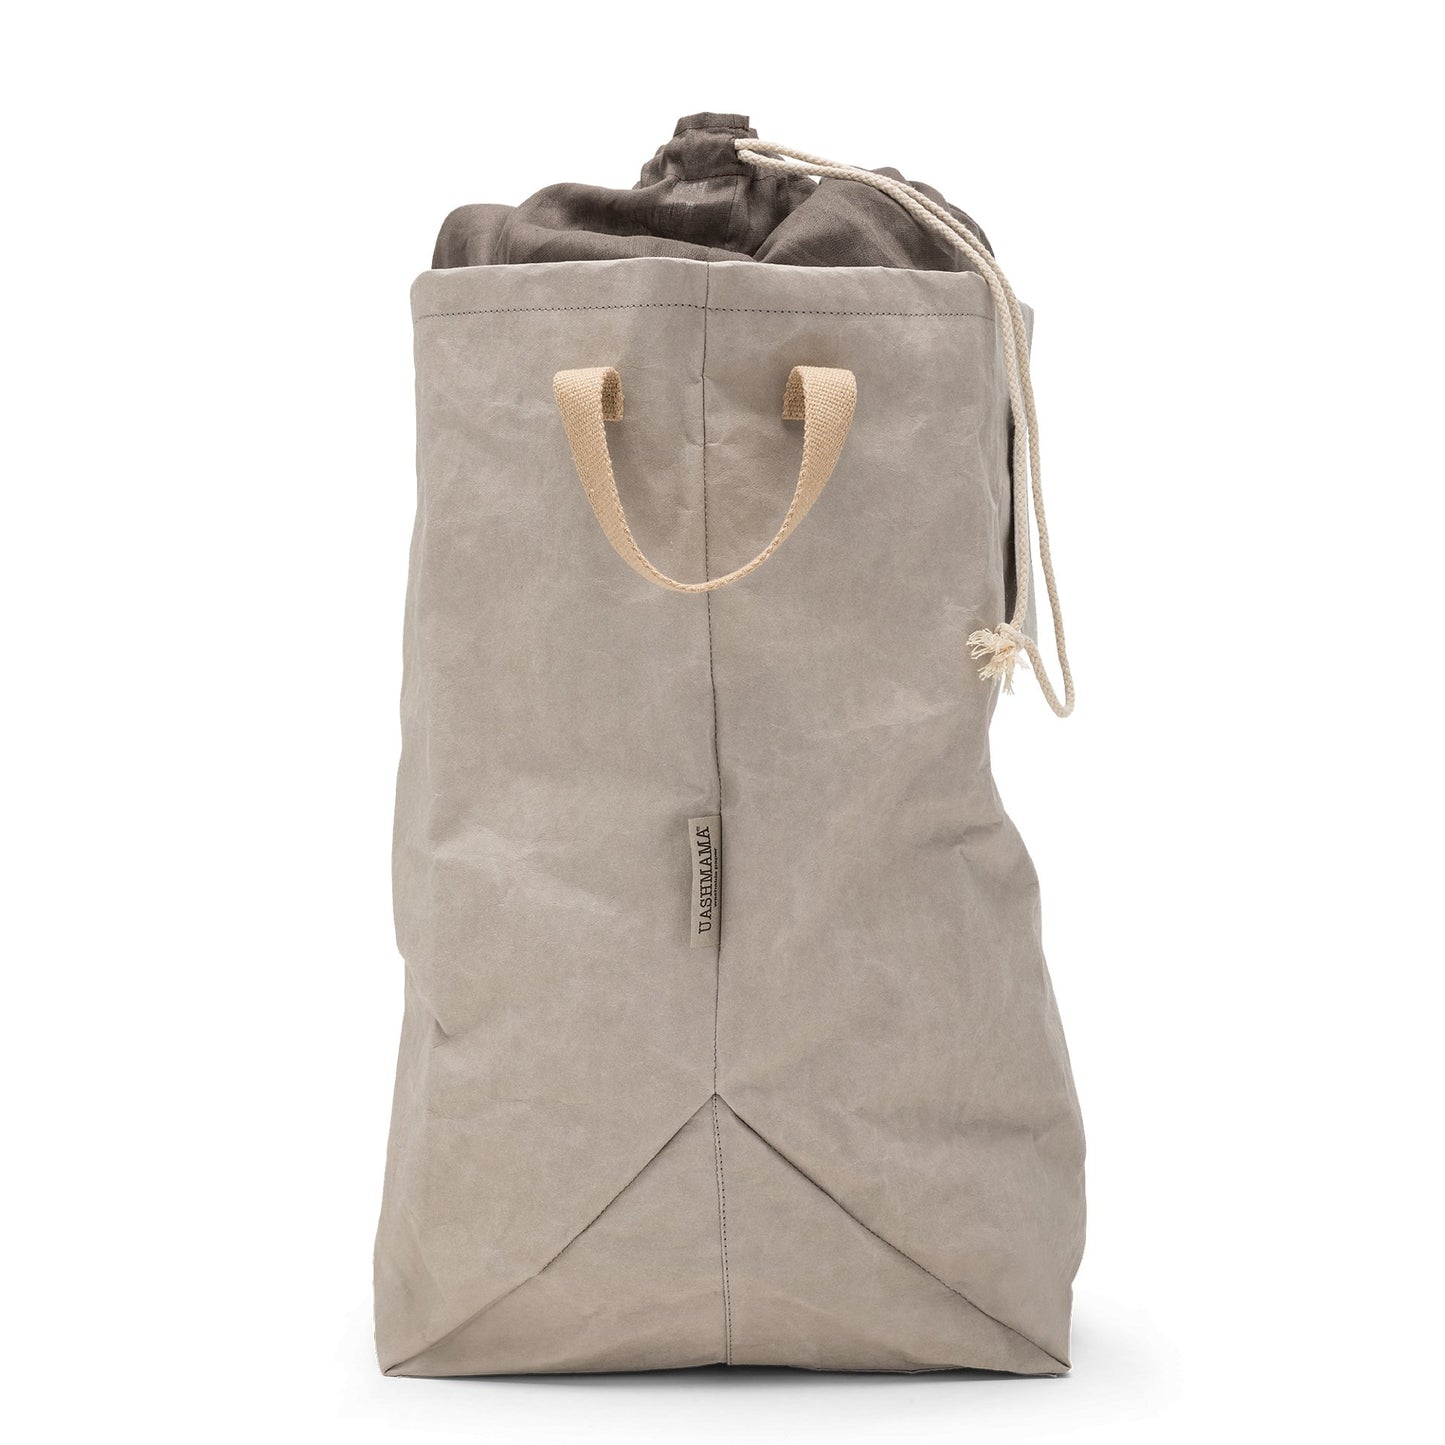 A washable paper laundry bag is shown in grey from a side angle. It features two side handles, a popper tab, and an interior drawstring lining.